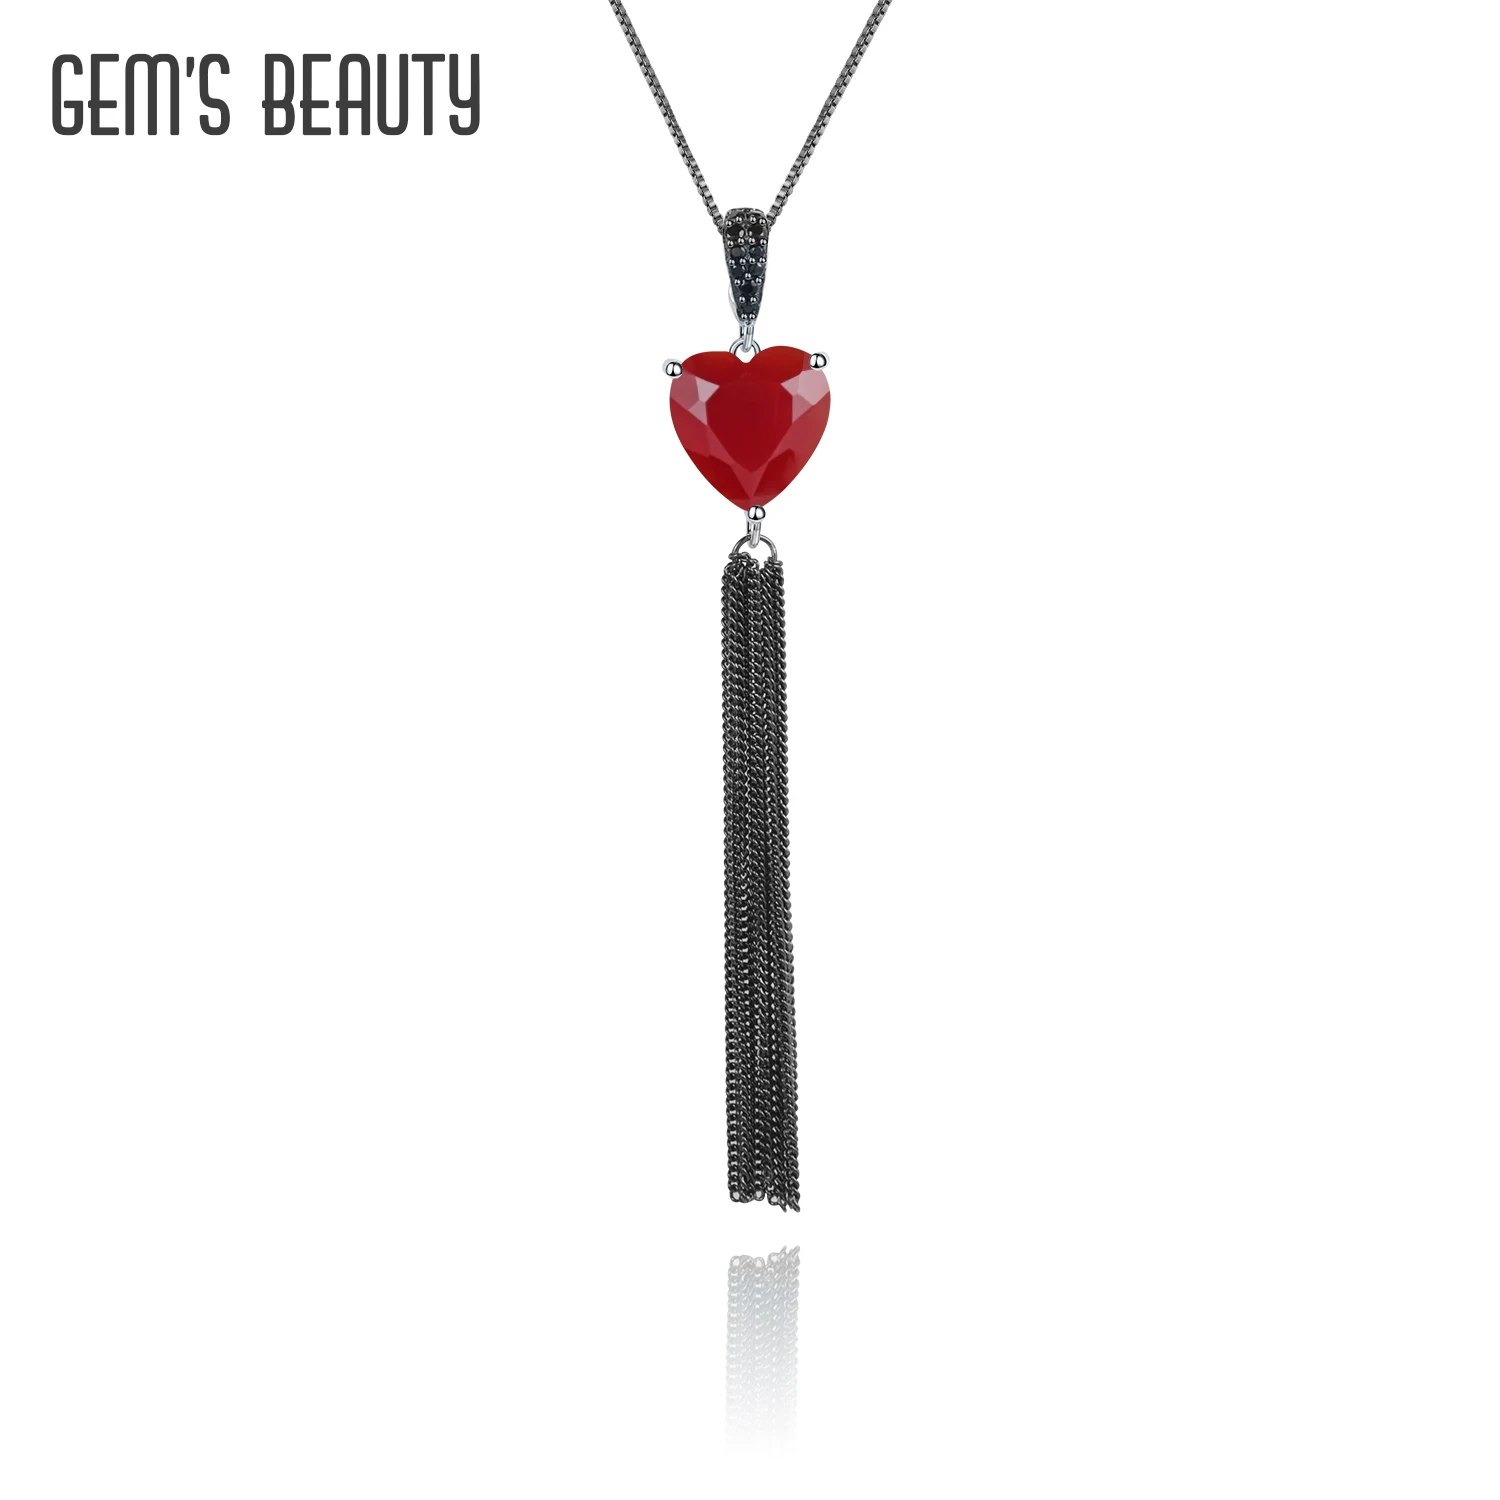 

GEM'S BEAUTY 925 Sterling Silver Original Design Heart Pendant with Tassels Natural Red Agate Necklace Love Token for Women